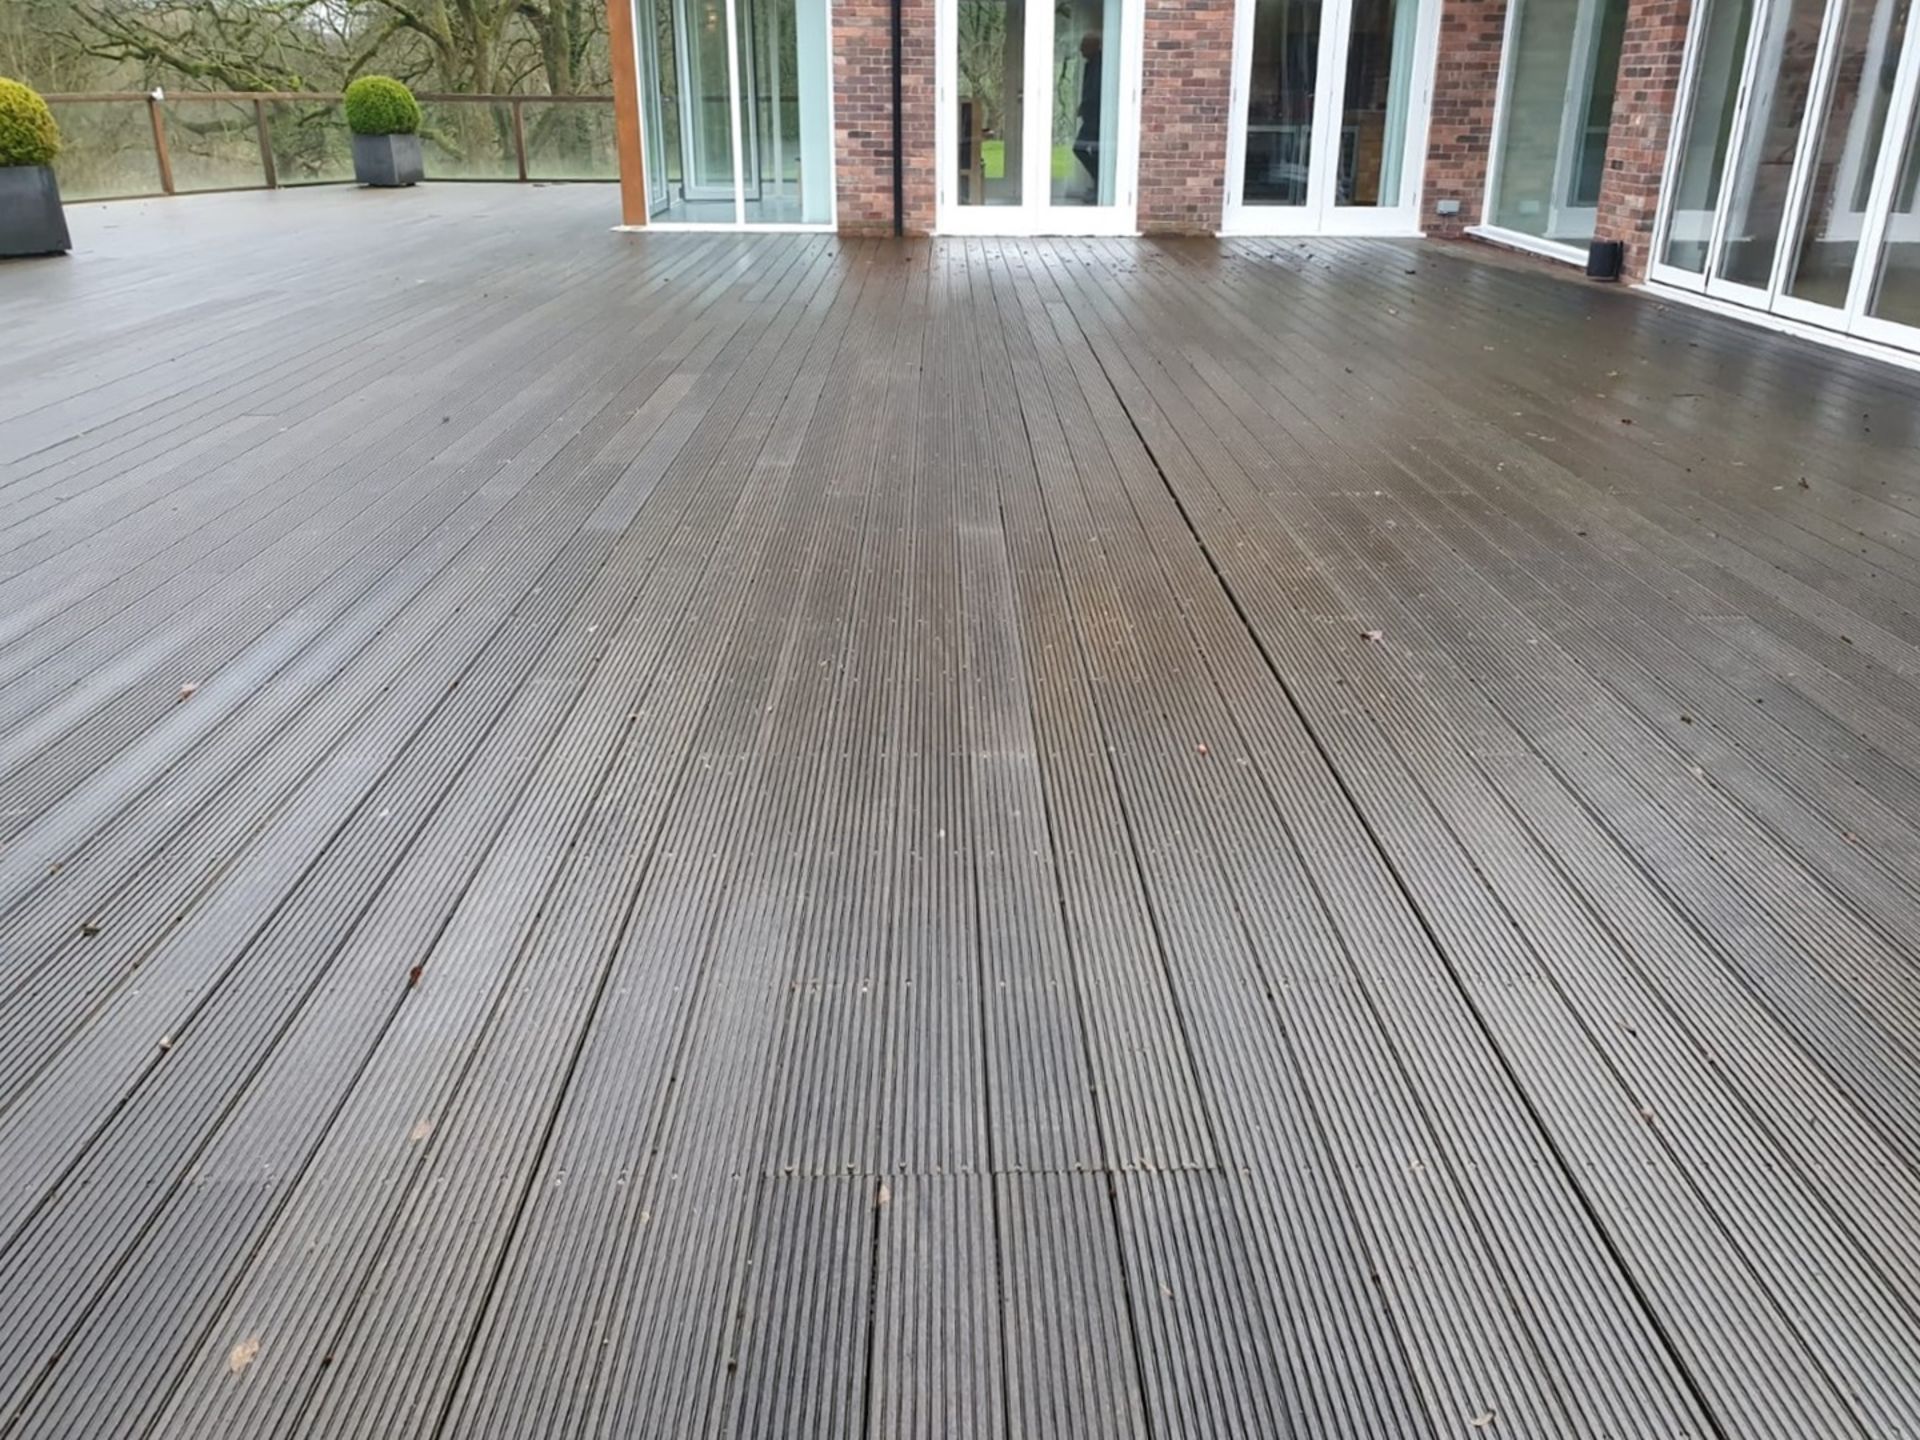 Large Quantity Of Outdoor Timber Decking & Glazed Balustrade - CL487 - Location: Wigan WN1 *NO VAT* - Image 10 of 21